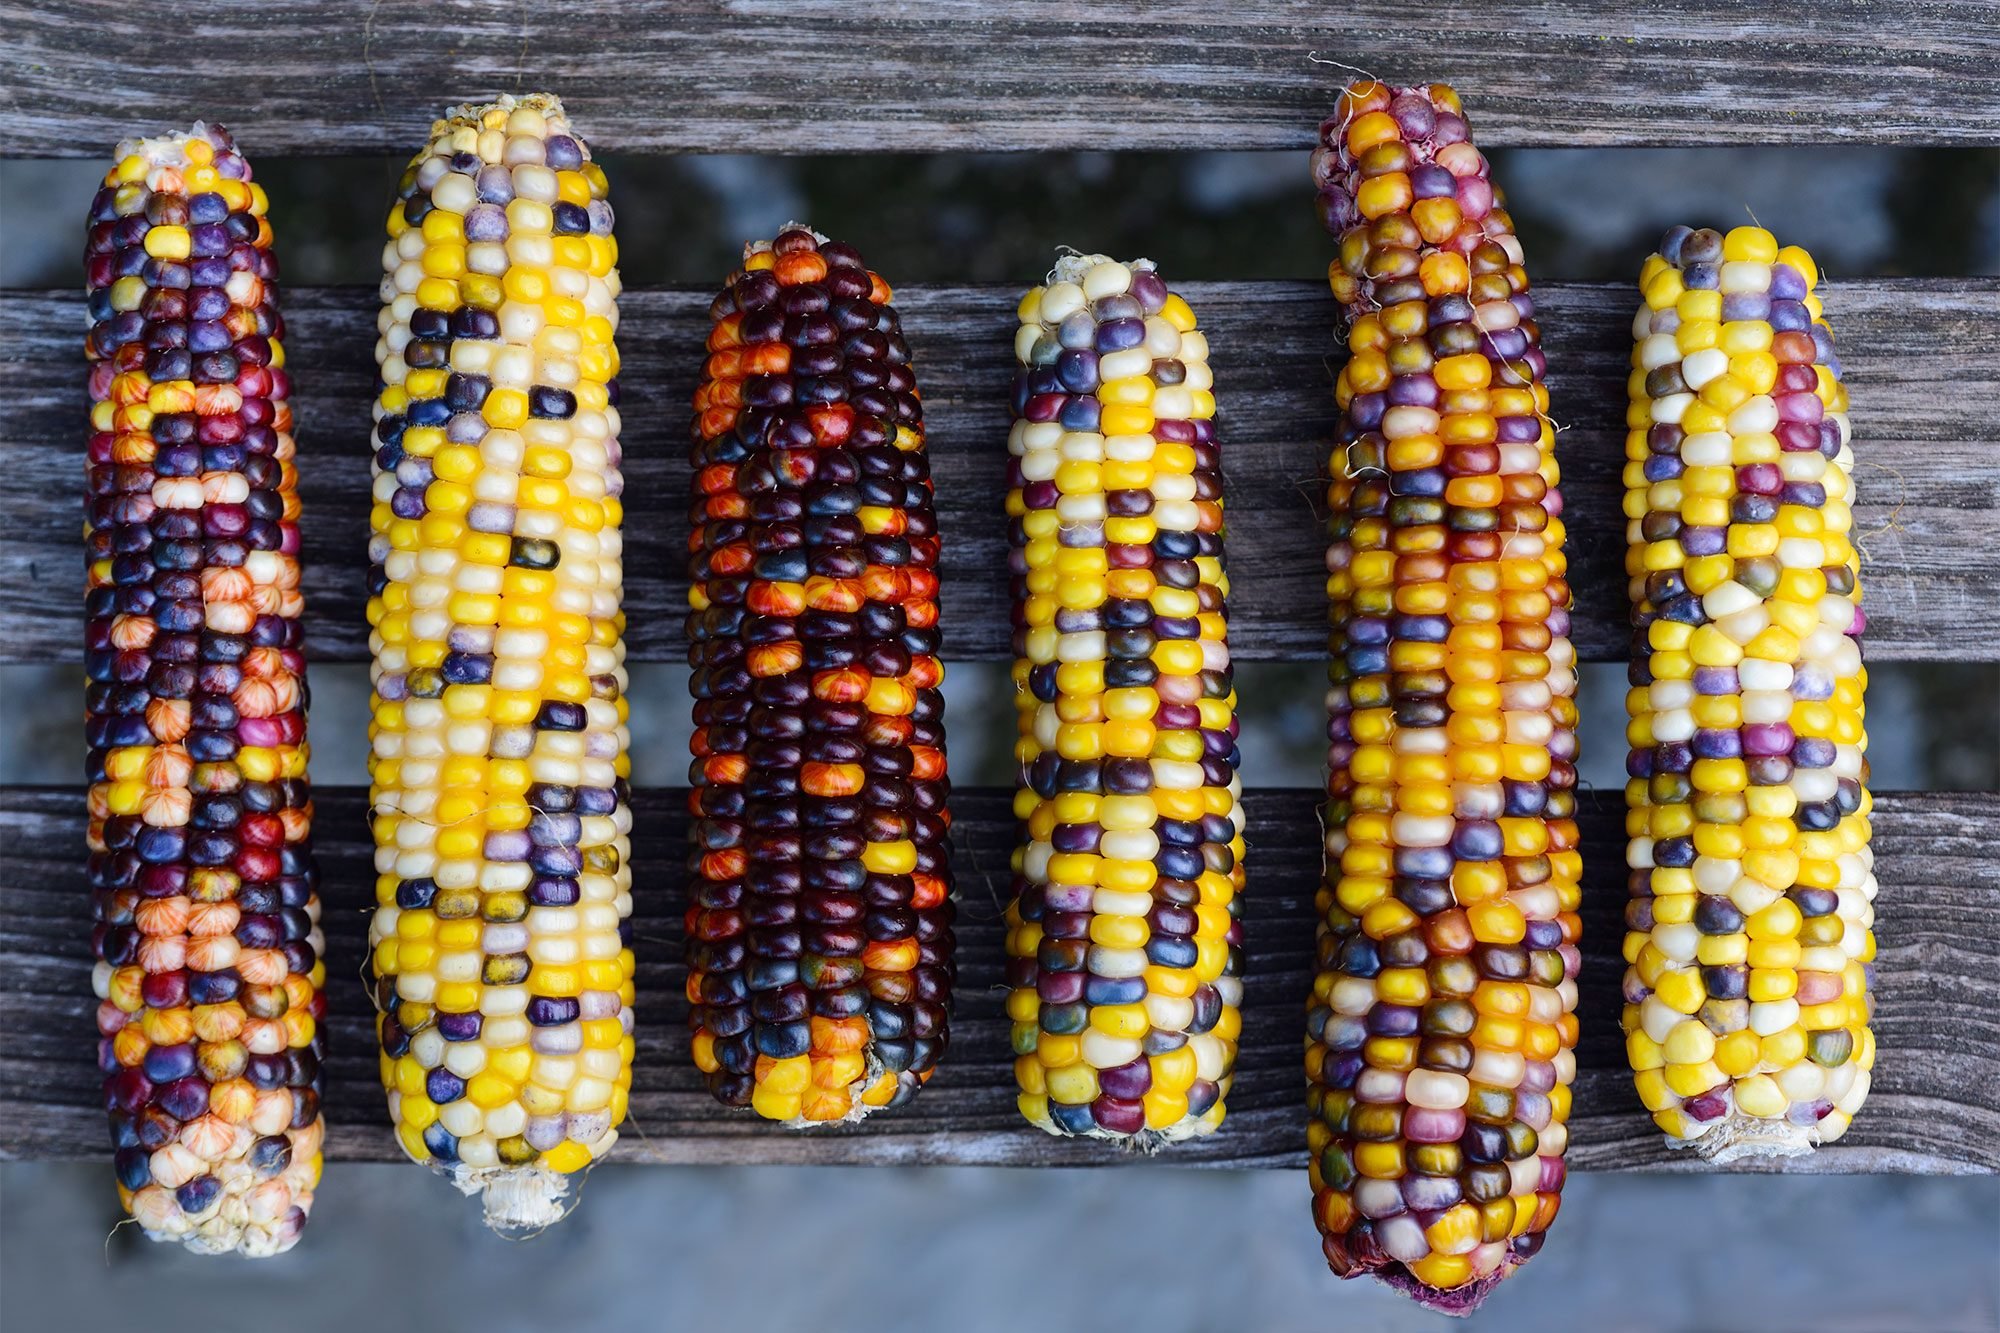 Glass Gem Corn Makes Your Harvest Look Absolutely Magical